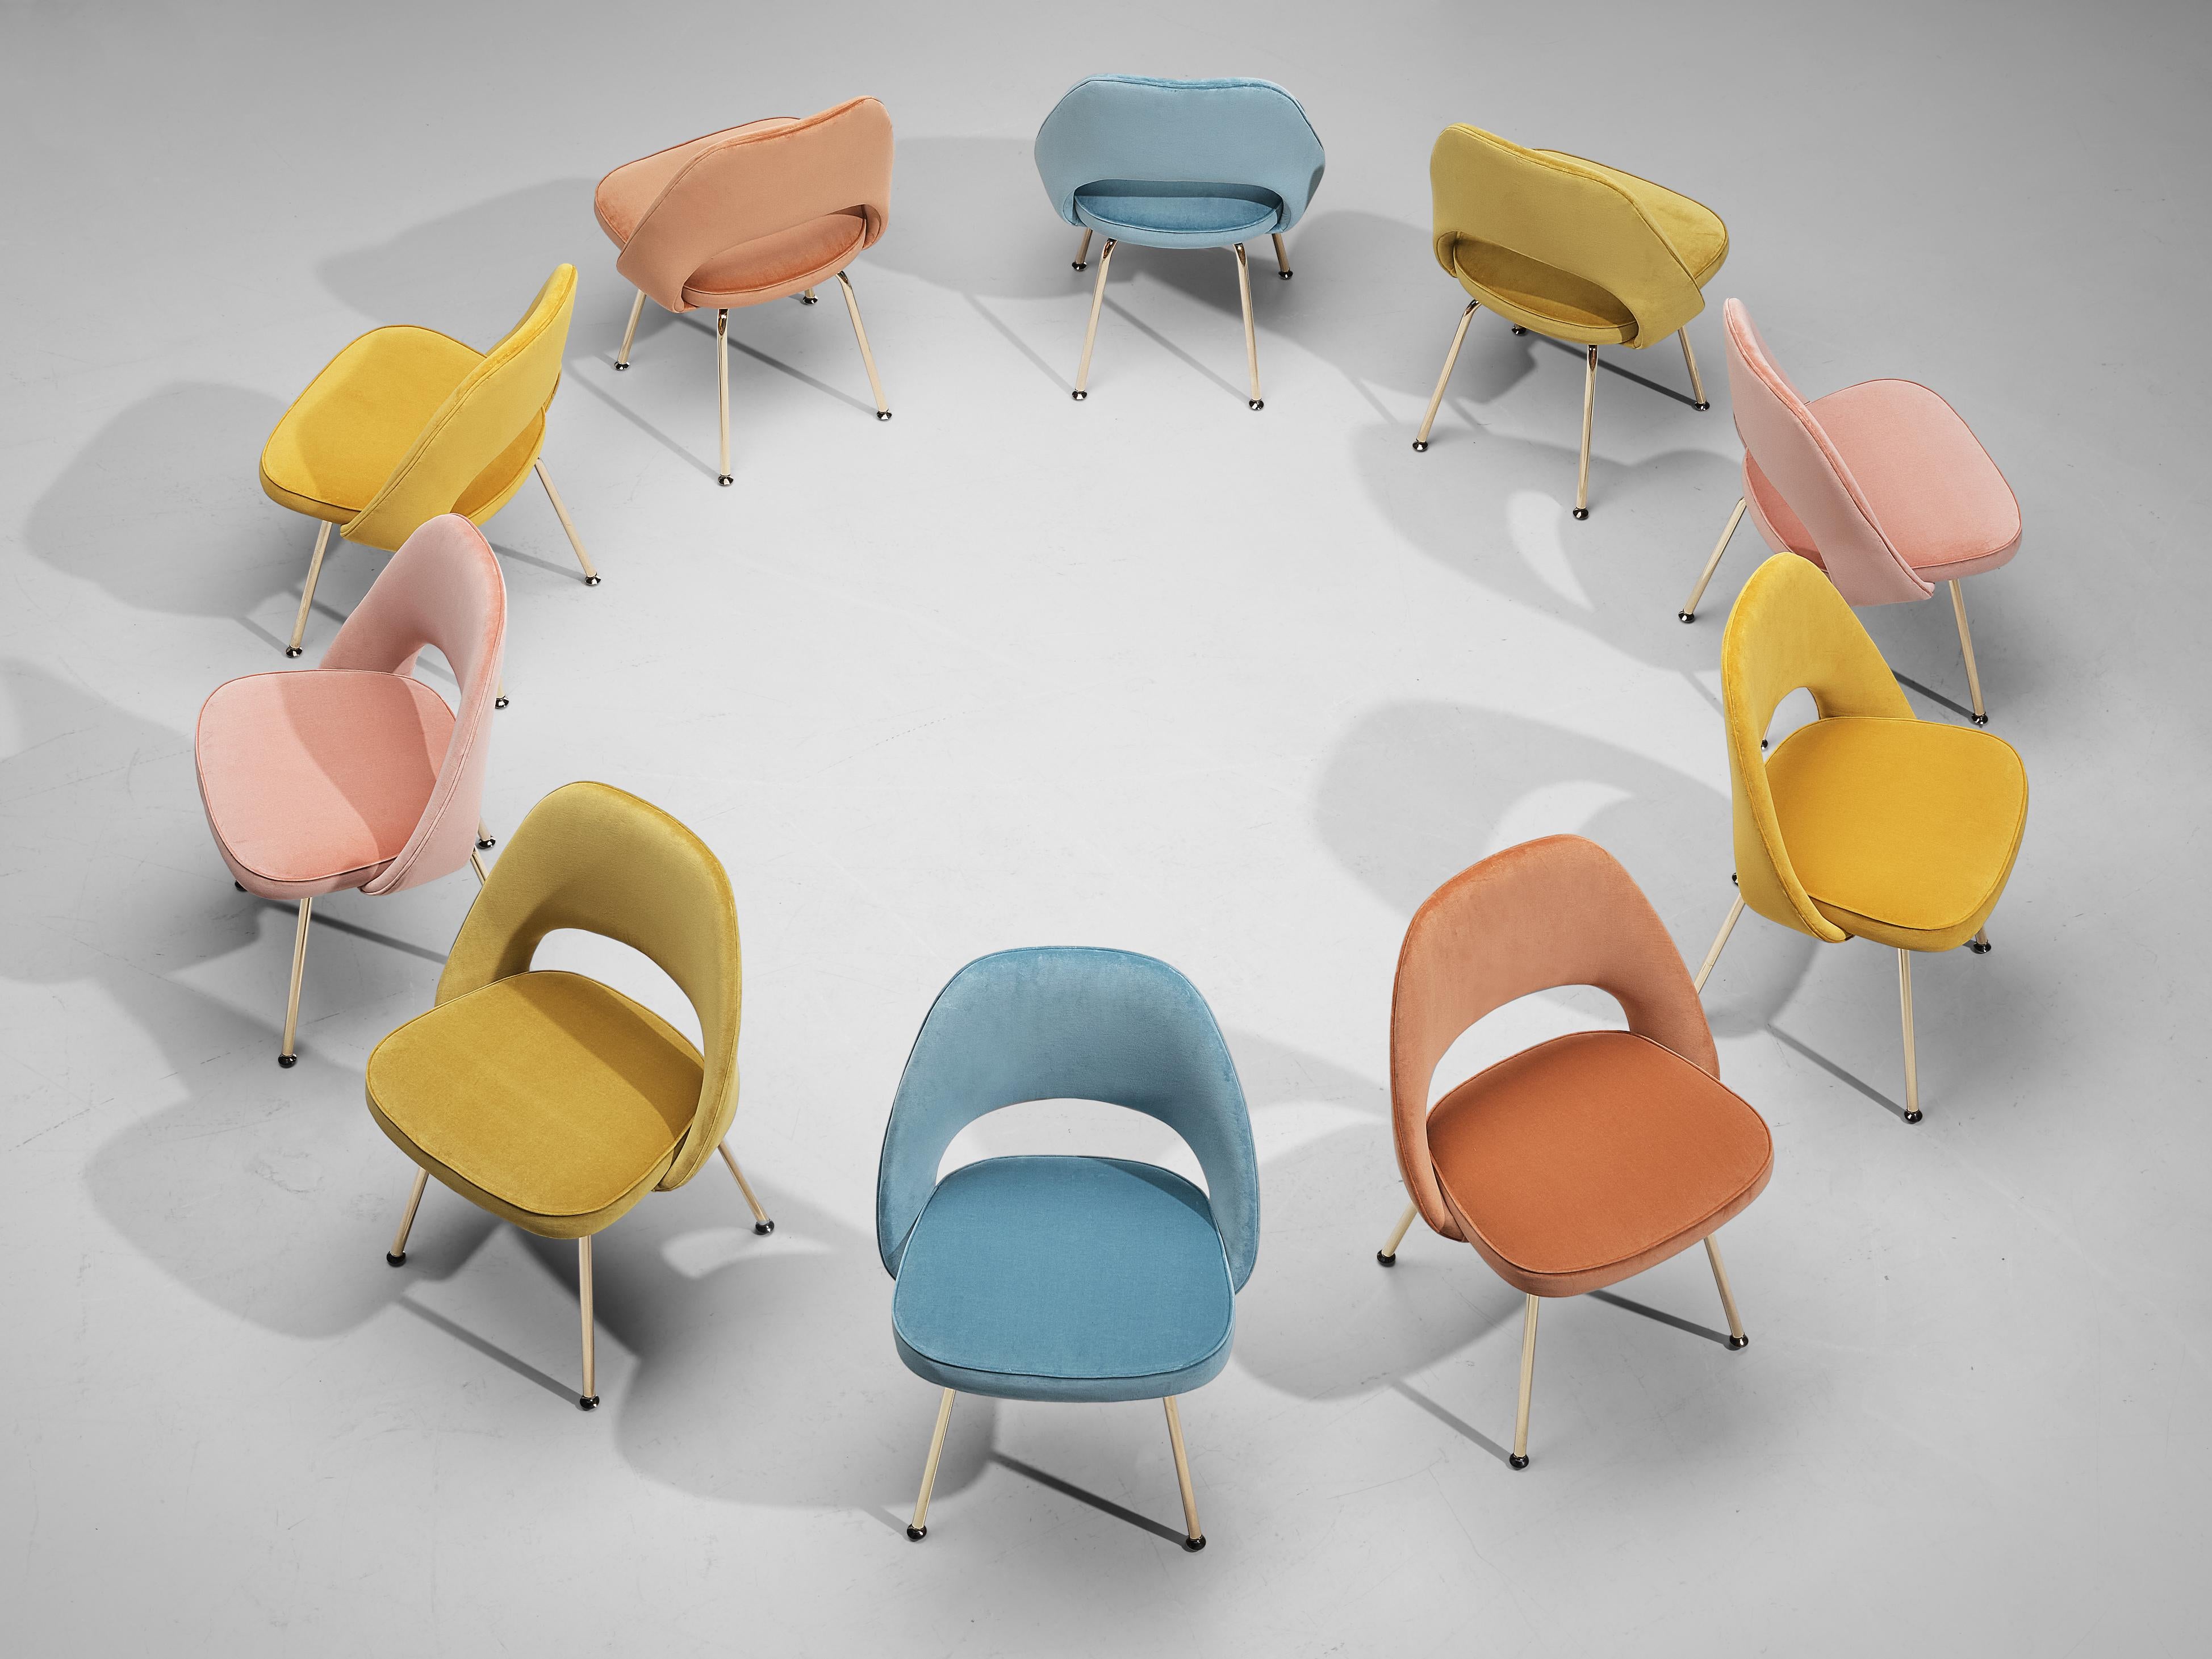 Eero Saarinen for Knoll, set of ten dining chairs, model 72, brass coated steel, velvet upholstery, United States, design 1948

Set of organic shaped chairs designed by Eero Saarinen. This iconic model is reupholstered in different shades of pastel